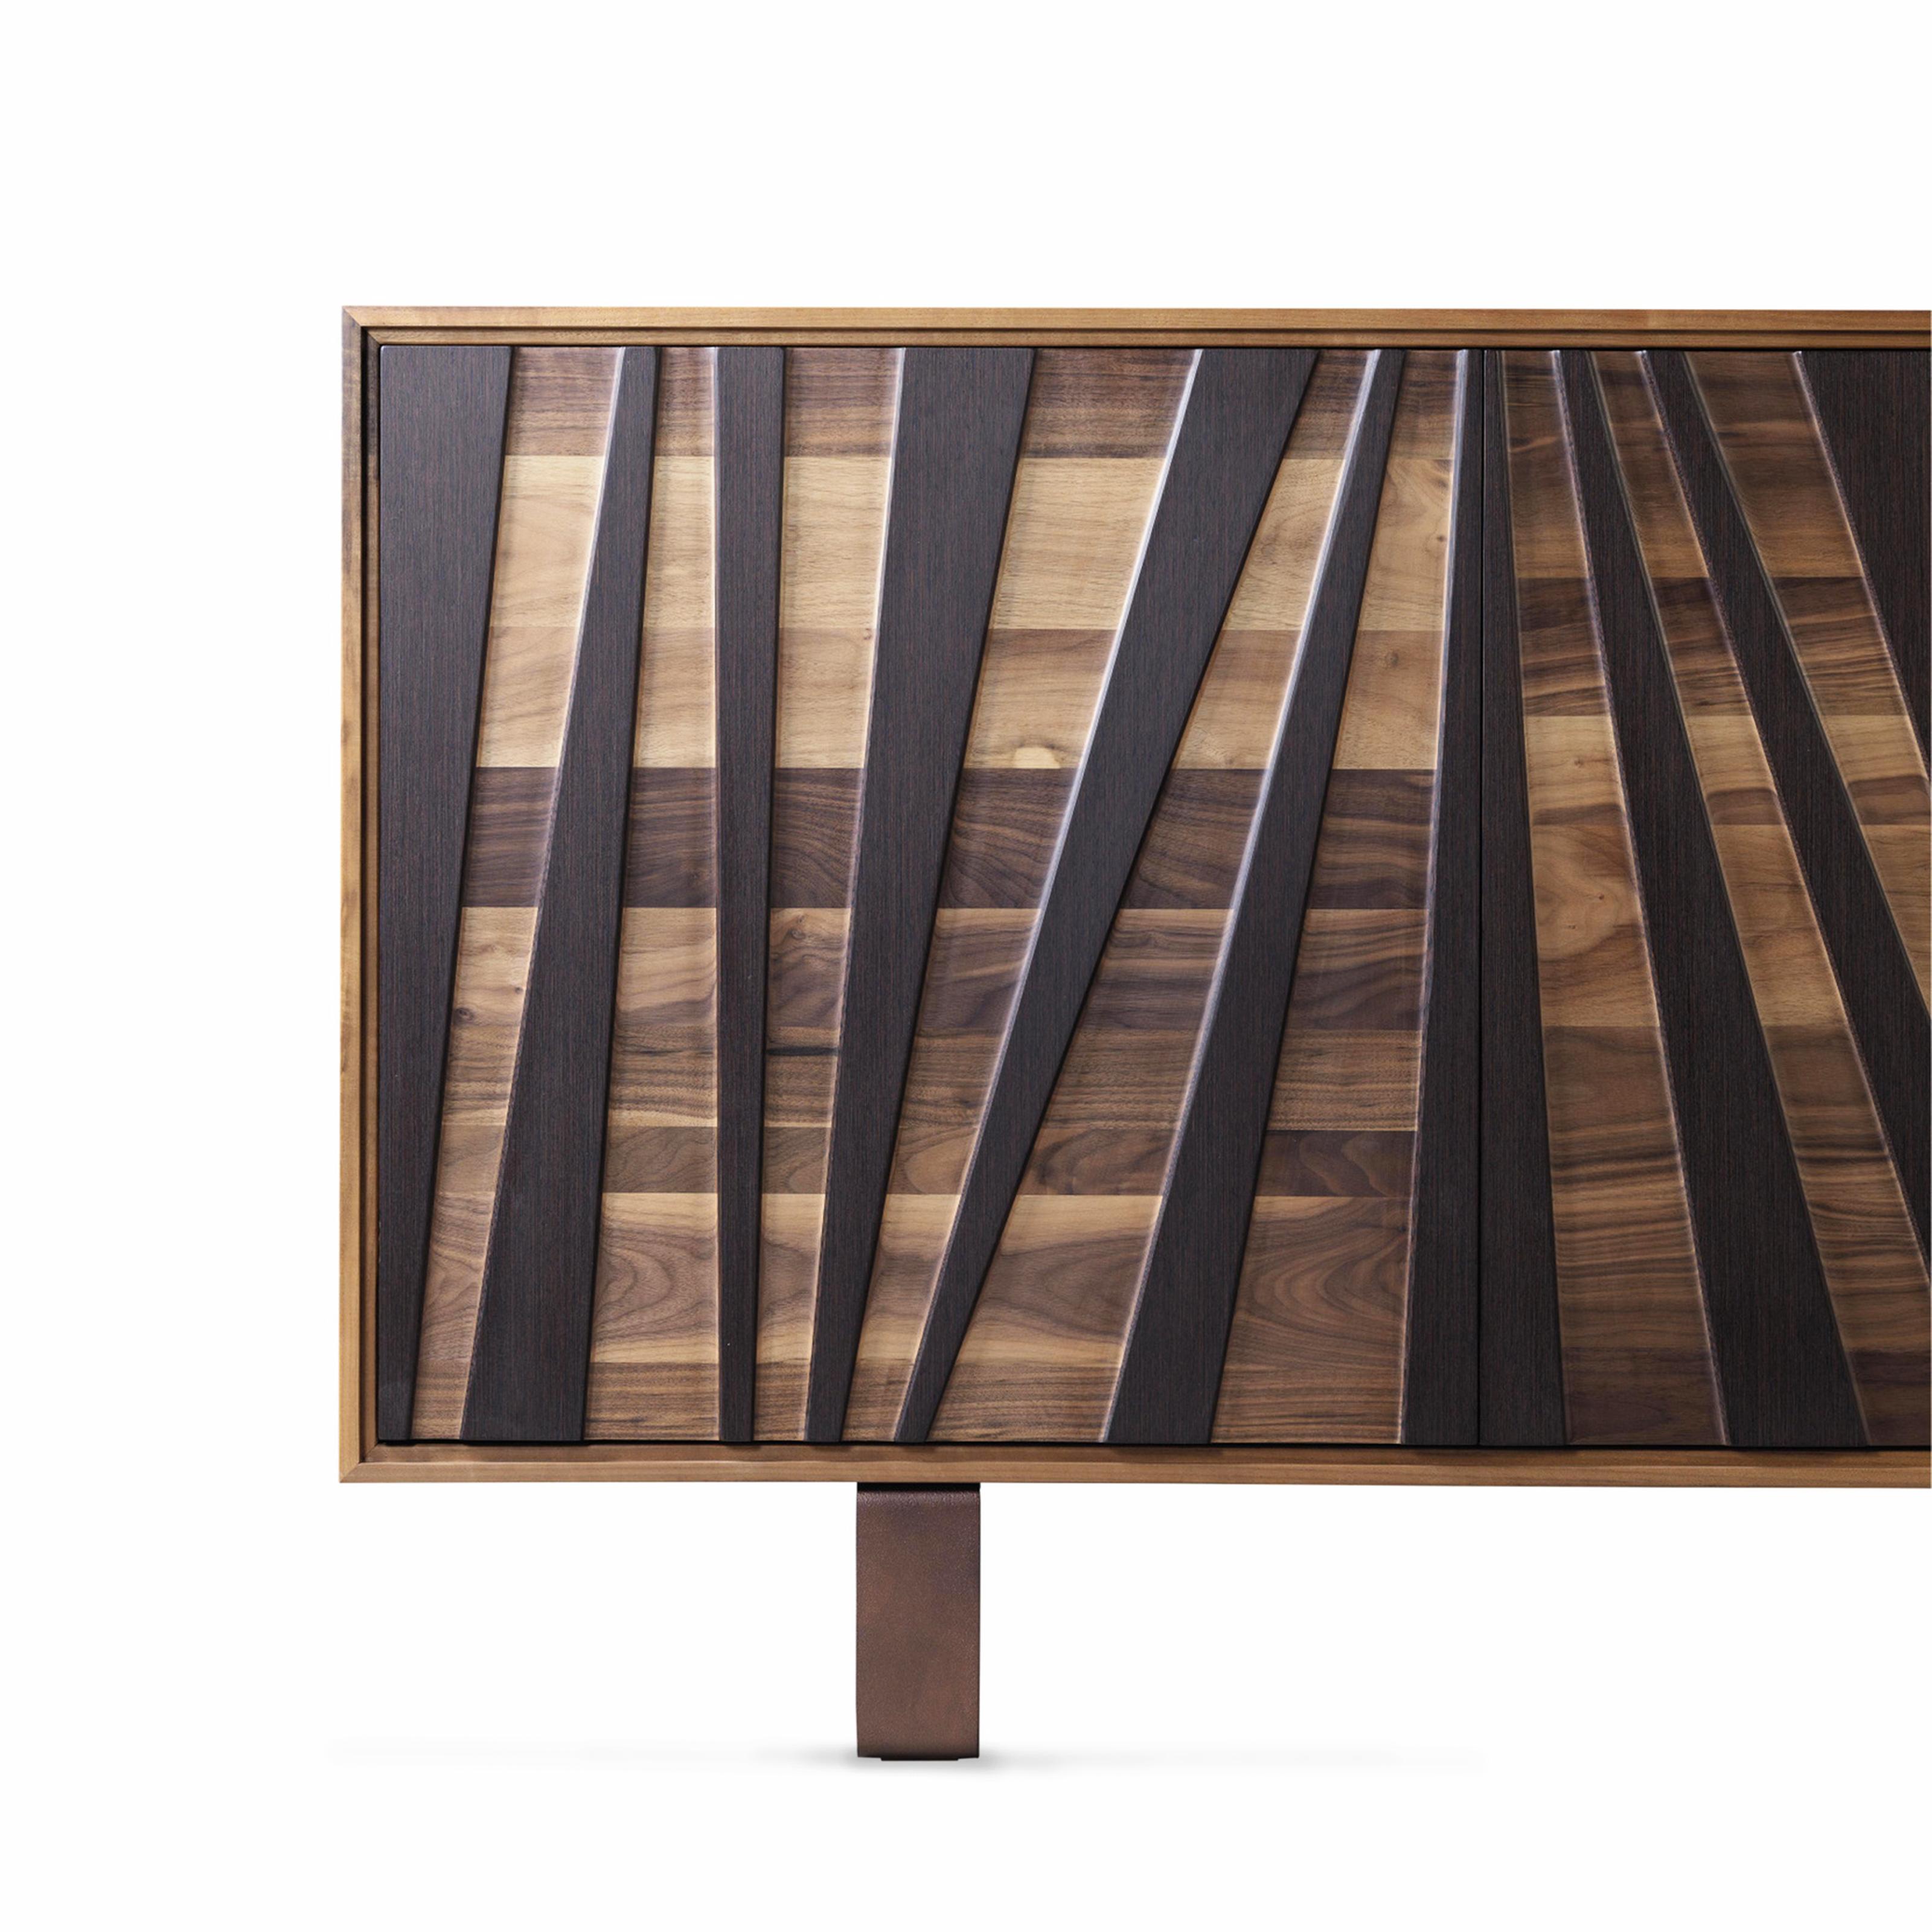 Wenge Materia Ventaglio Solid Wood Sideboard, Walnut & Wengè, Contemporary For Sale